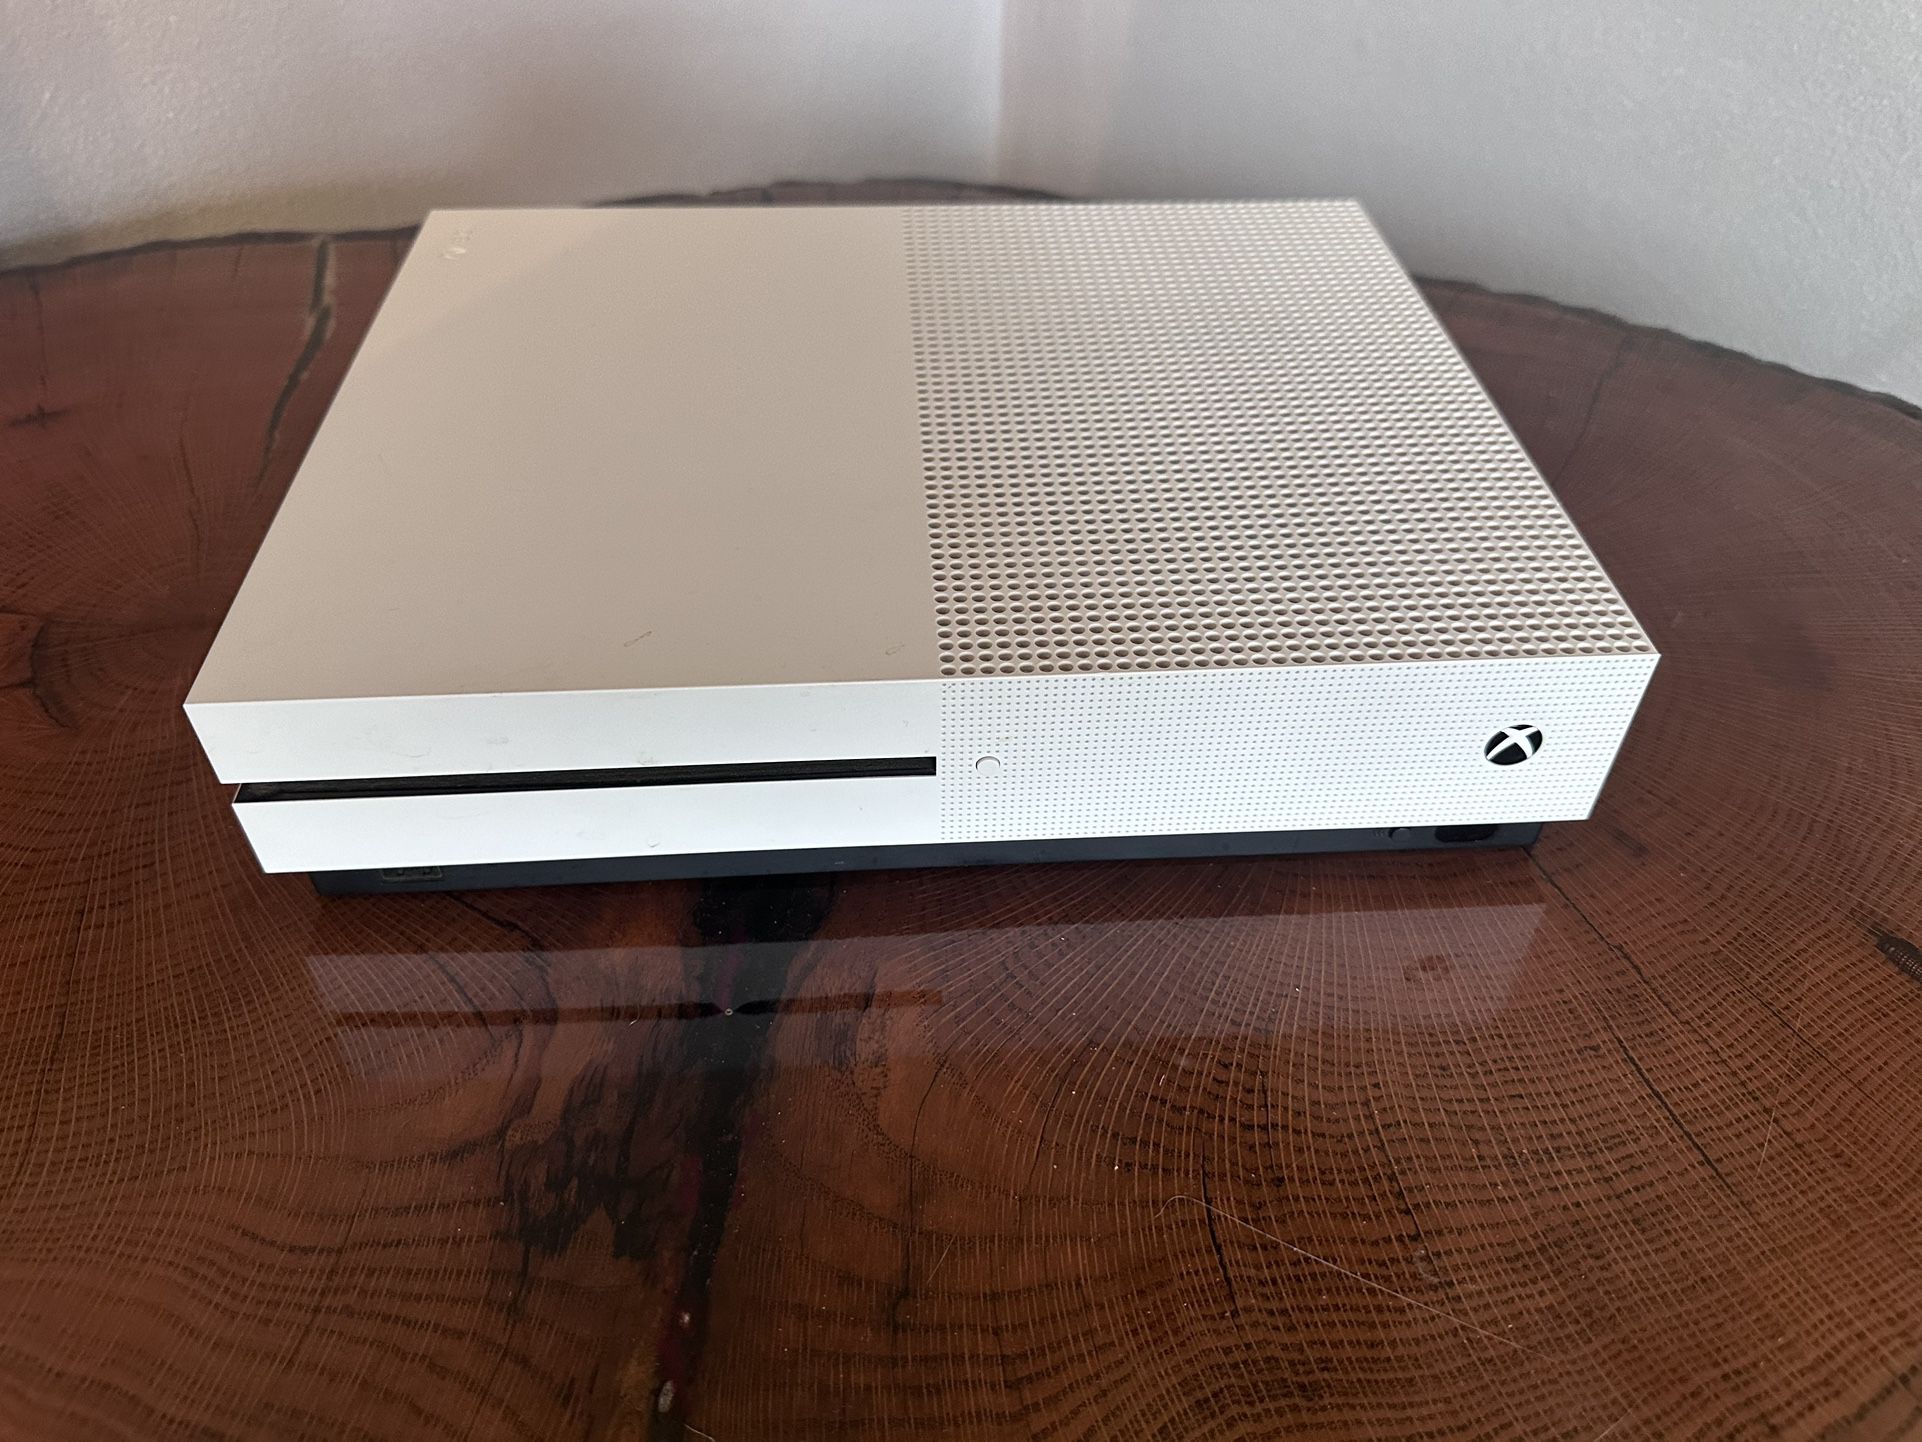 Xbox One S 1TB Console Only